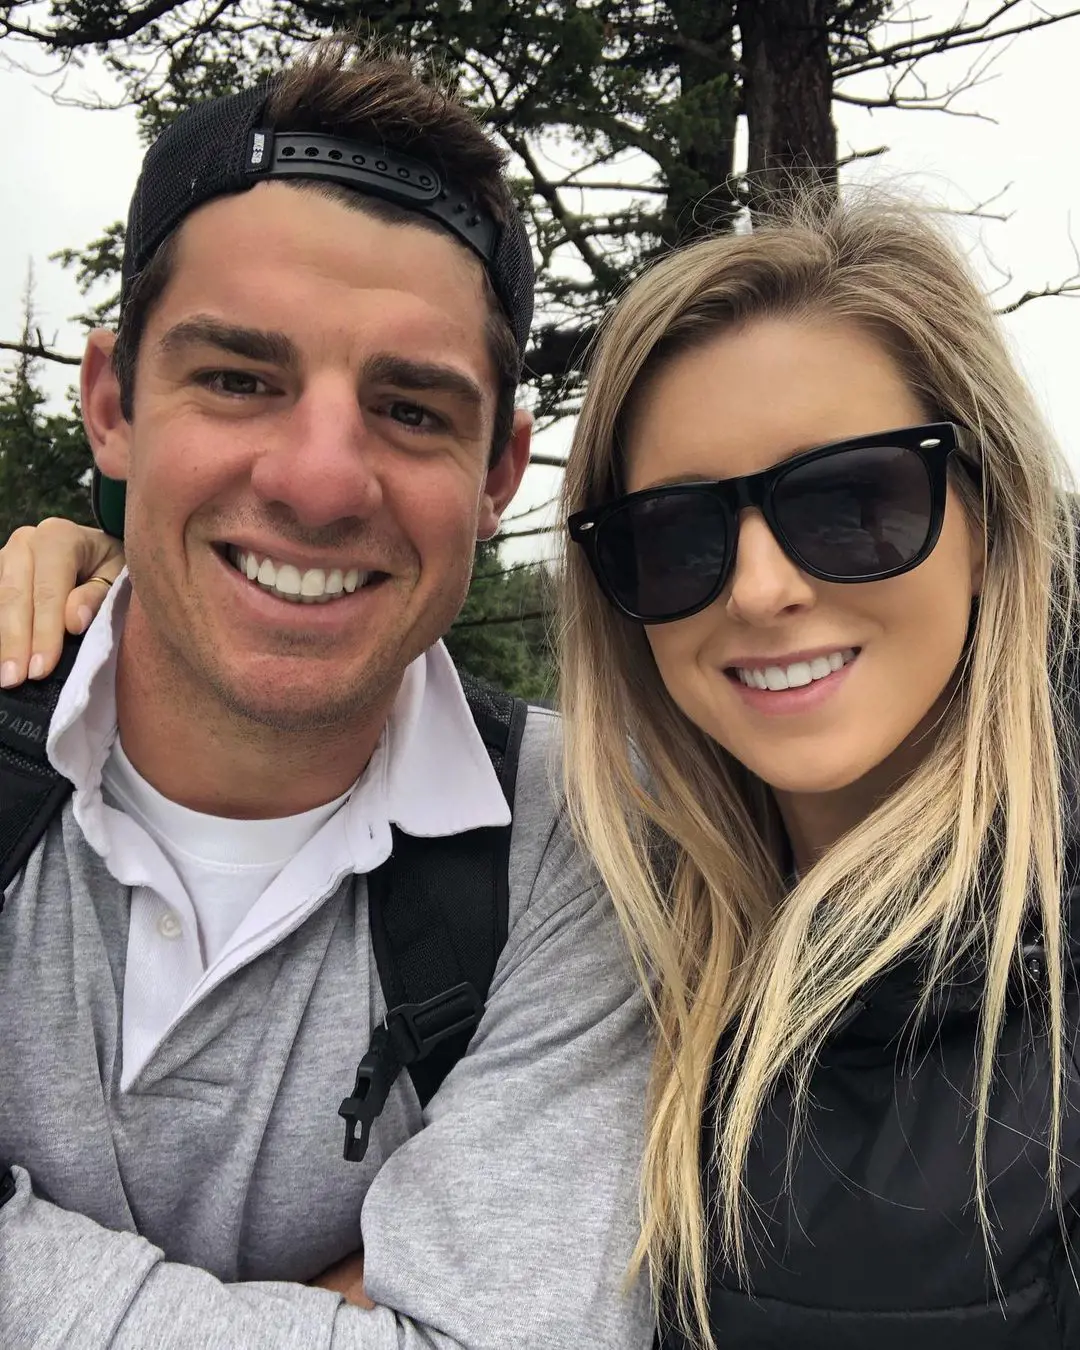 Moises and Krista shared a selfie when they were hiking at Bow Falls, Canada in 2019